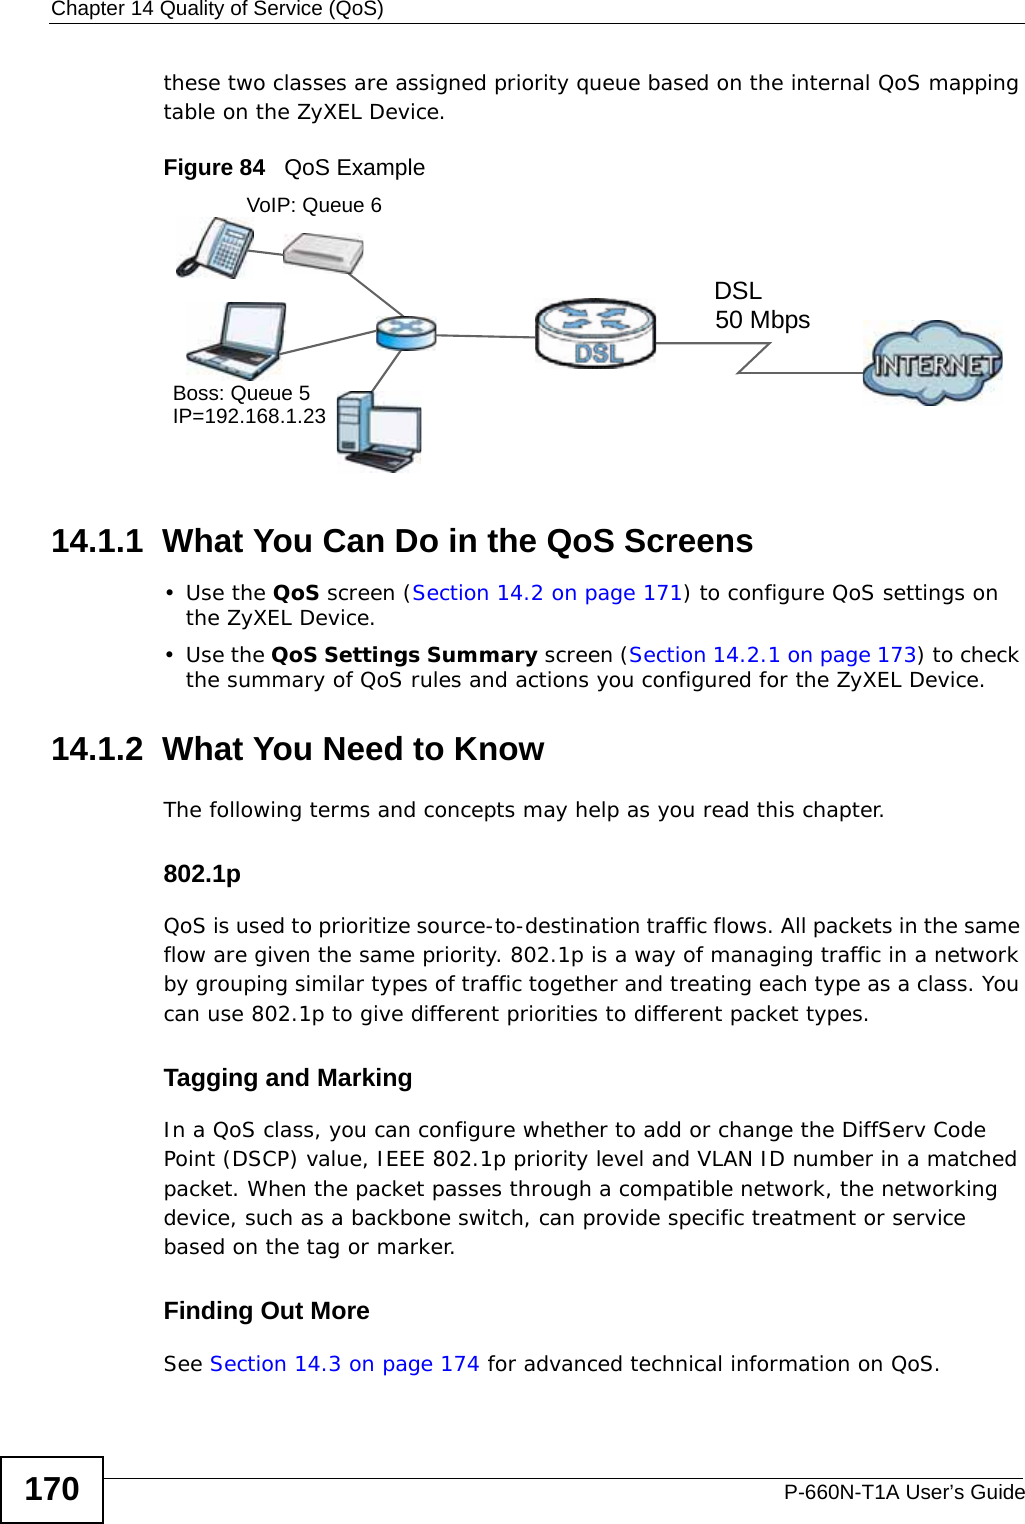 Chapter 14 Quality of Service (QoS)P-660N-T1A User’s Guide170these two classes are assigned priority queue based on the internal QoS mapping table on the ZyXEL Device.Figure 84   QoS Example14.1.1  What You Can Do in the QoS Screens•Use the QoS screen (Section 14.2 on page 171) to configure QoS settings on the ZyXEL Device.•Use the QoS Settings Summary screen (Section 14.2.1 on page 173) to check the summary of QoS rules and actions you configured for the ZyXEL Device.14.1.2  What You Need to KnowThe following terms and concepts may help as you read this chapter.802.1pQoS is used to prioritize source-to-destination traffic flows. All packets in the same flow are given the same priority. 802.1p is a way of managing traffic in a network by grouping similar types of traffic together and treating each type as a class. You can use 802.1p to give different priorities to different packet types. Tagging and MarkingIn a QoS class, you can configure whether to add or change the DiffServ Code Point (DSCP) value, IEEE 802.1p priority level and VLAN ID number in a matched packet. When the packet passes through a compatible network, the networking device, such as a backbone switch, can provide specific treatment or service based on the tag or marker.Finding Out MoreSee Section 14.3 on page 174 for advanced technical information on QoS.50 MbpsDSLVoIP: Queue 6Boss: Queue 5IP=192.168.1.23